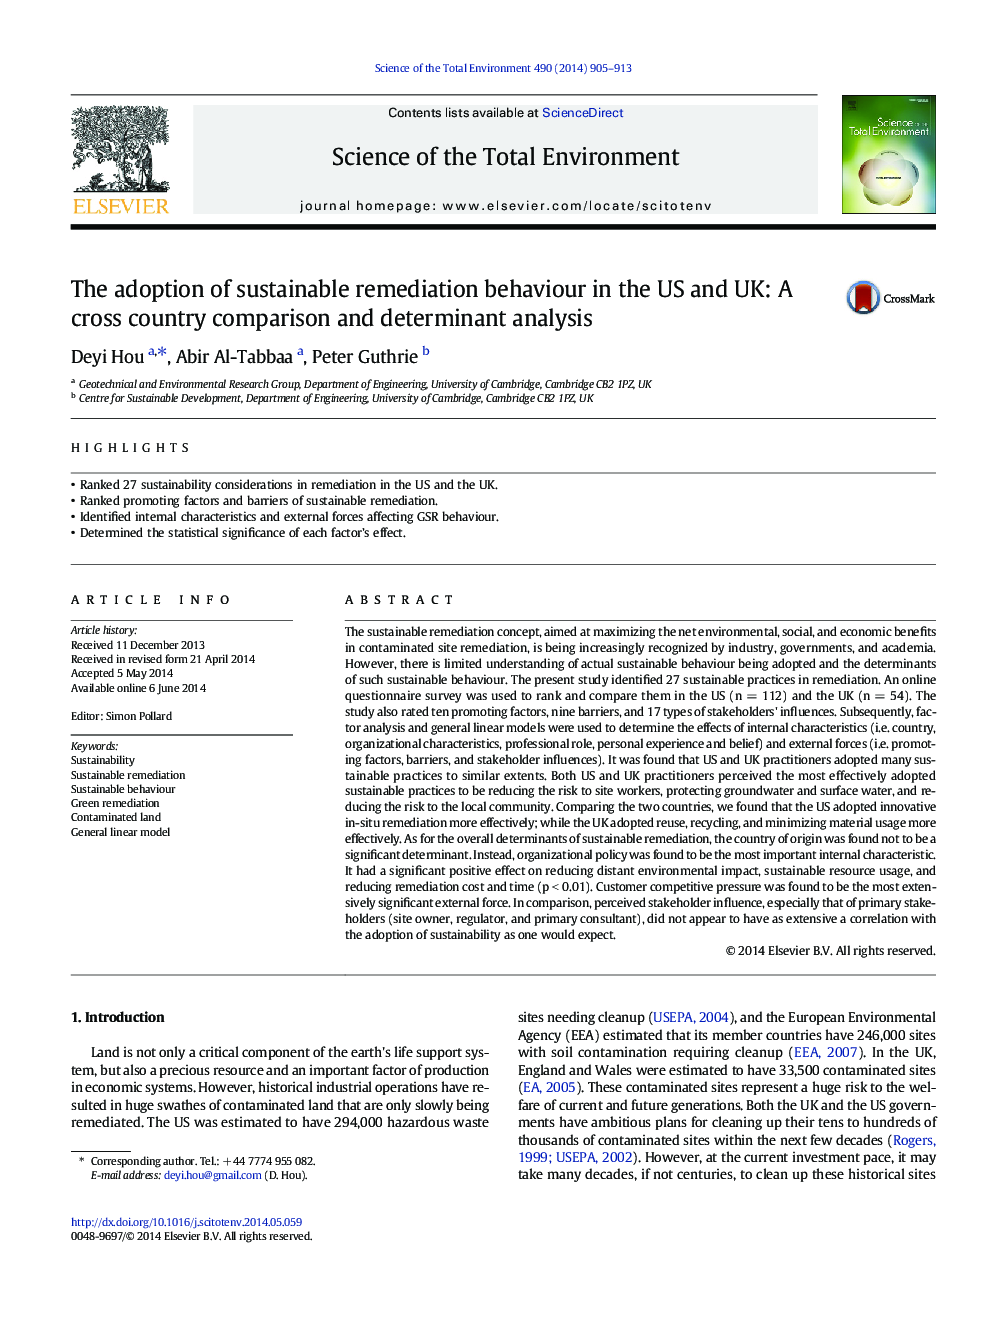 The adoption of sustainable remediation behaviour in the US and UK: A cross country comparison and determinant analysis